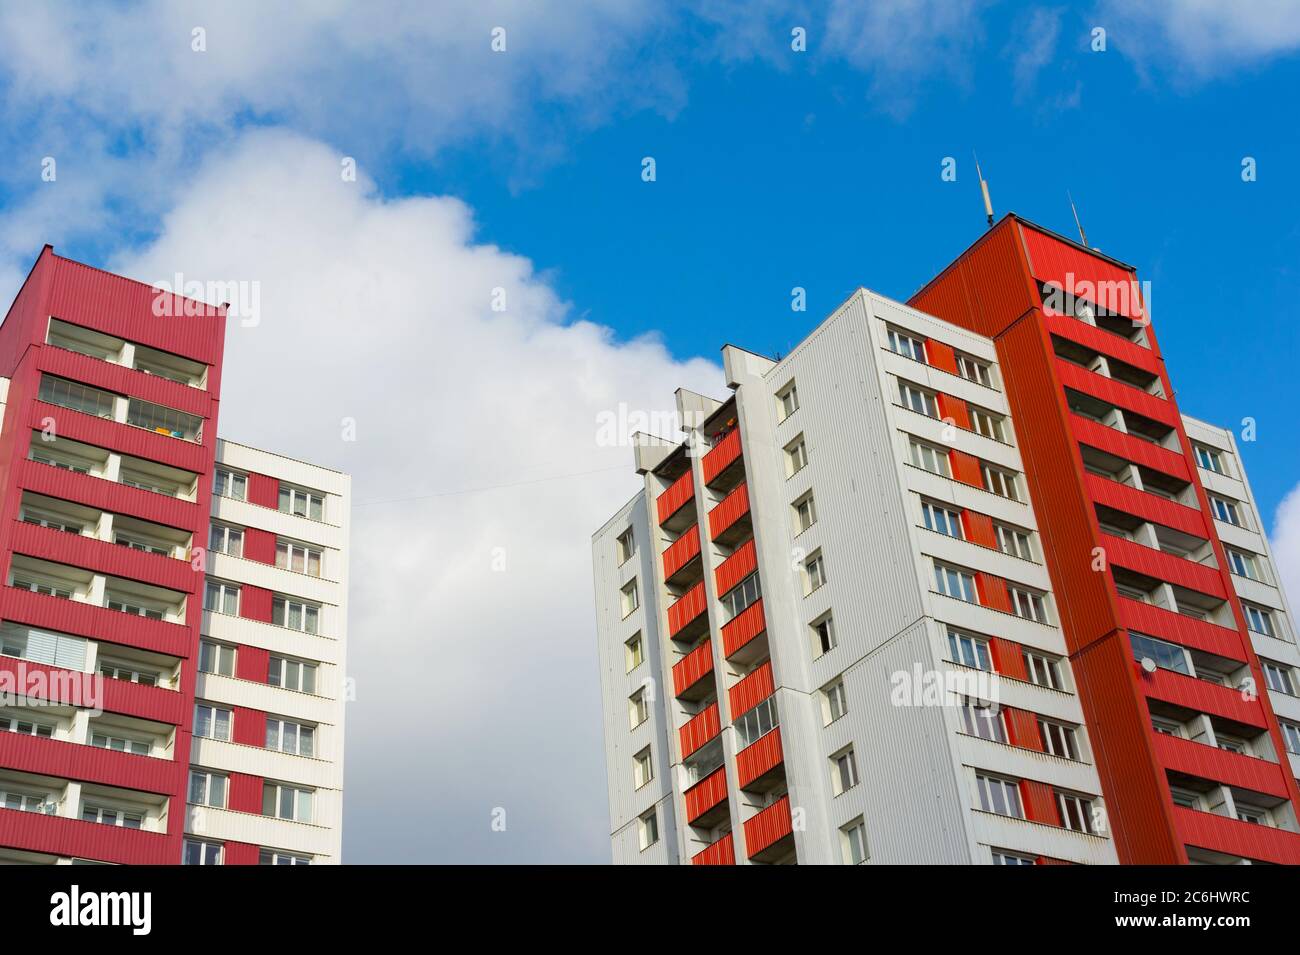 Blocks of flats made during era of socialism in eastern bloc. Cheap social housing for poor people today. Facade of architecture has bright red color. Stock Photo